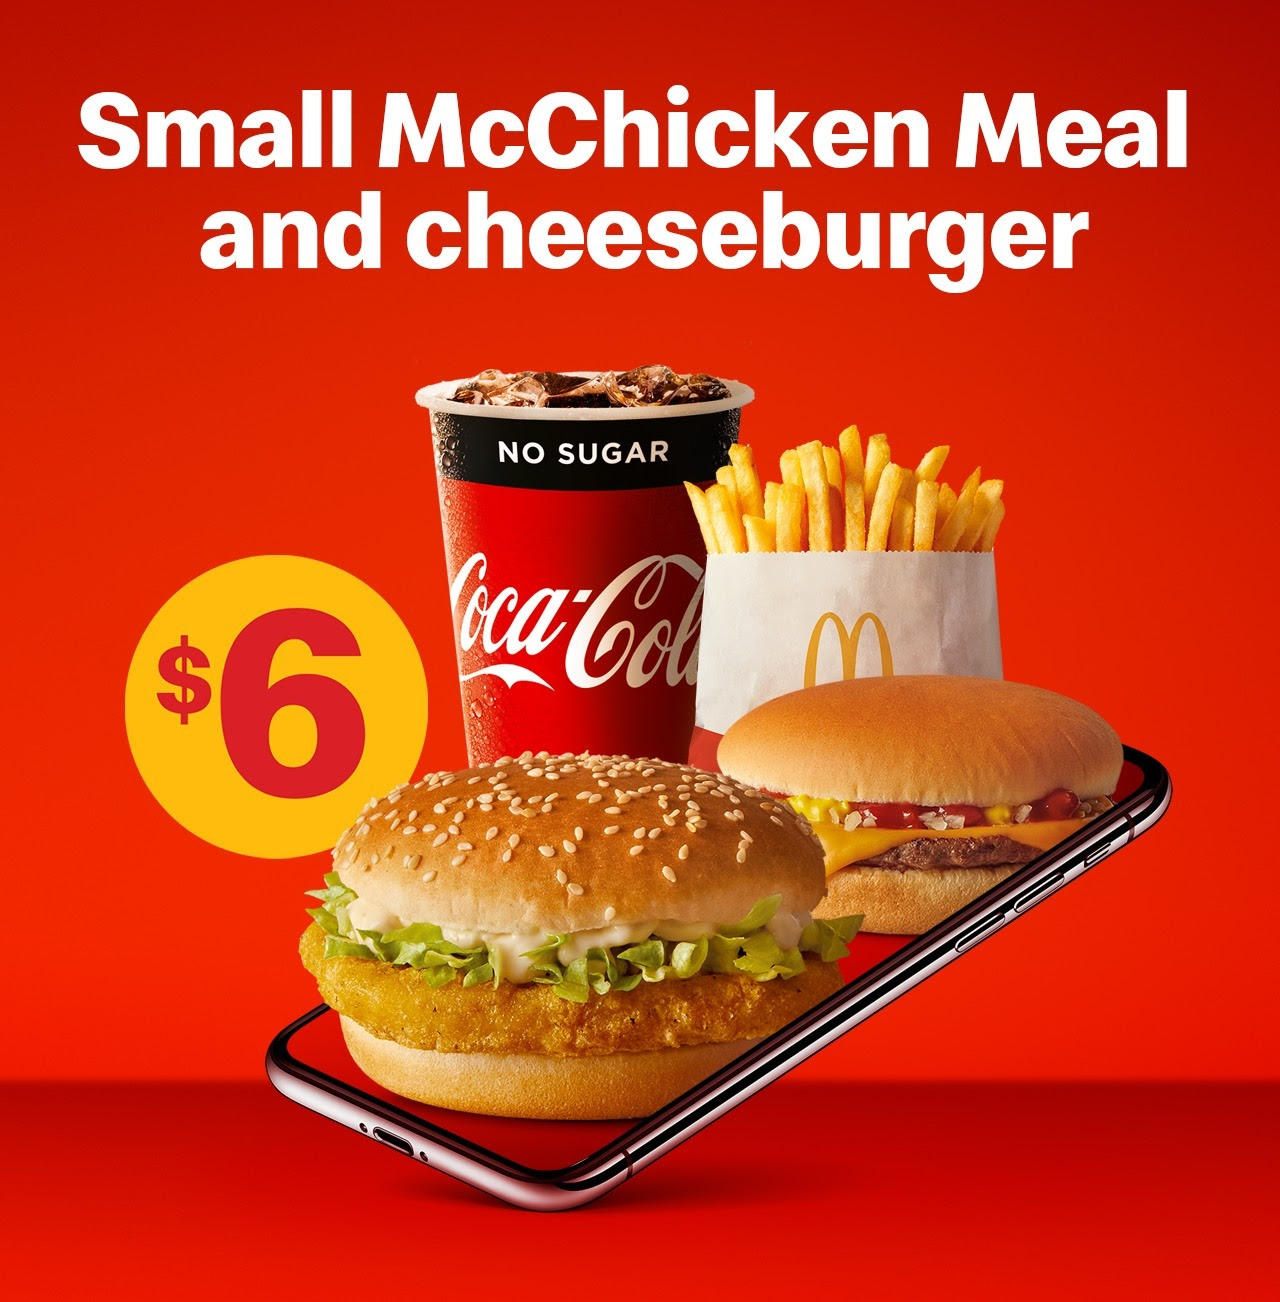 DEAL McDonald’s 6 Small McChicken Meal + Extra Cheeseburger with